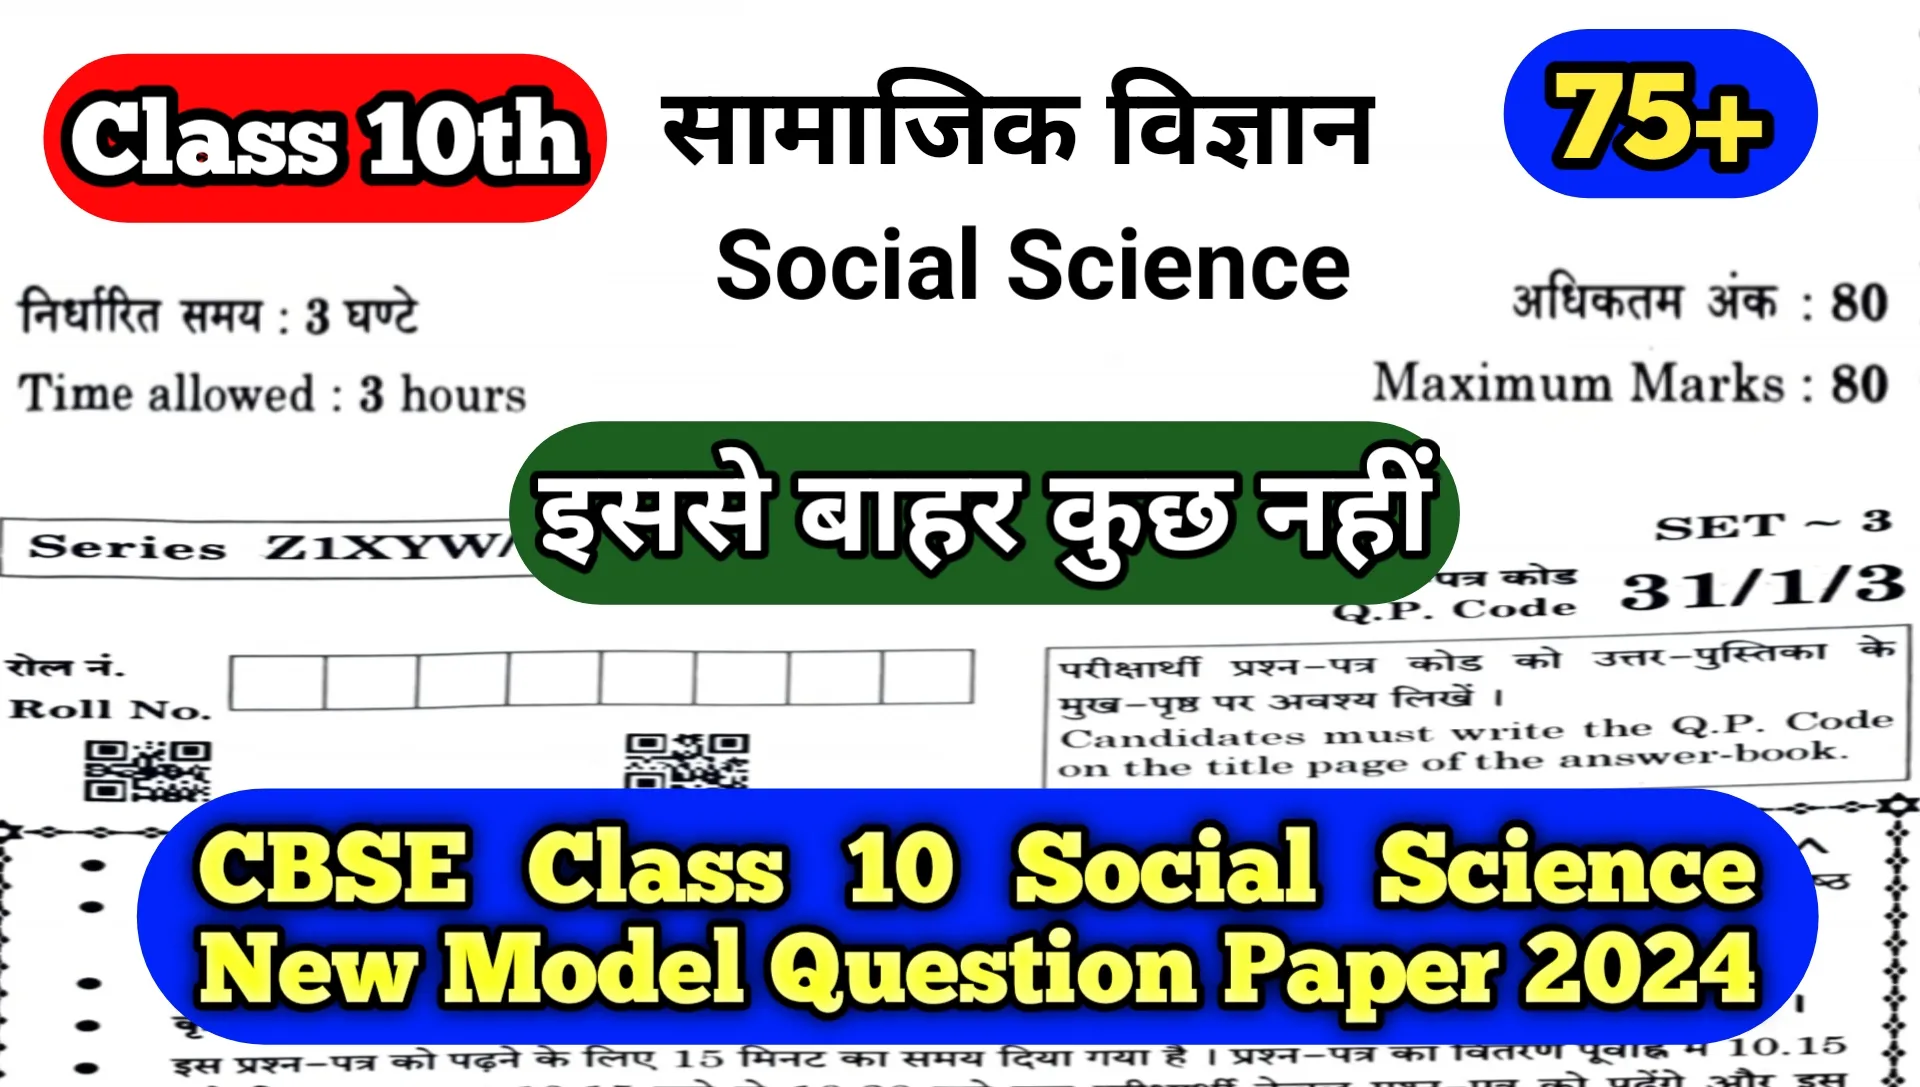 CBSE Class 10 Social Science New Model Question Paper 2024